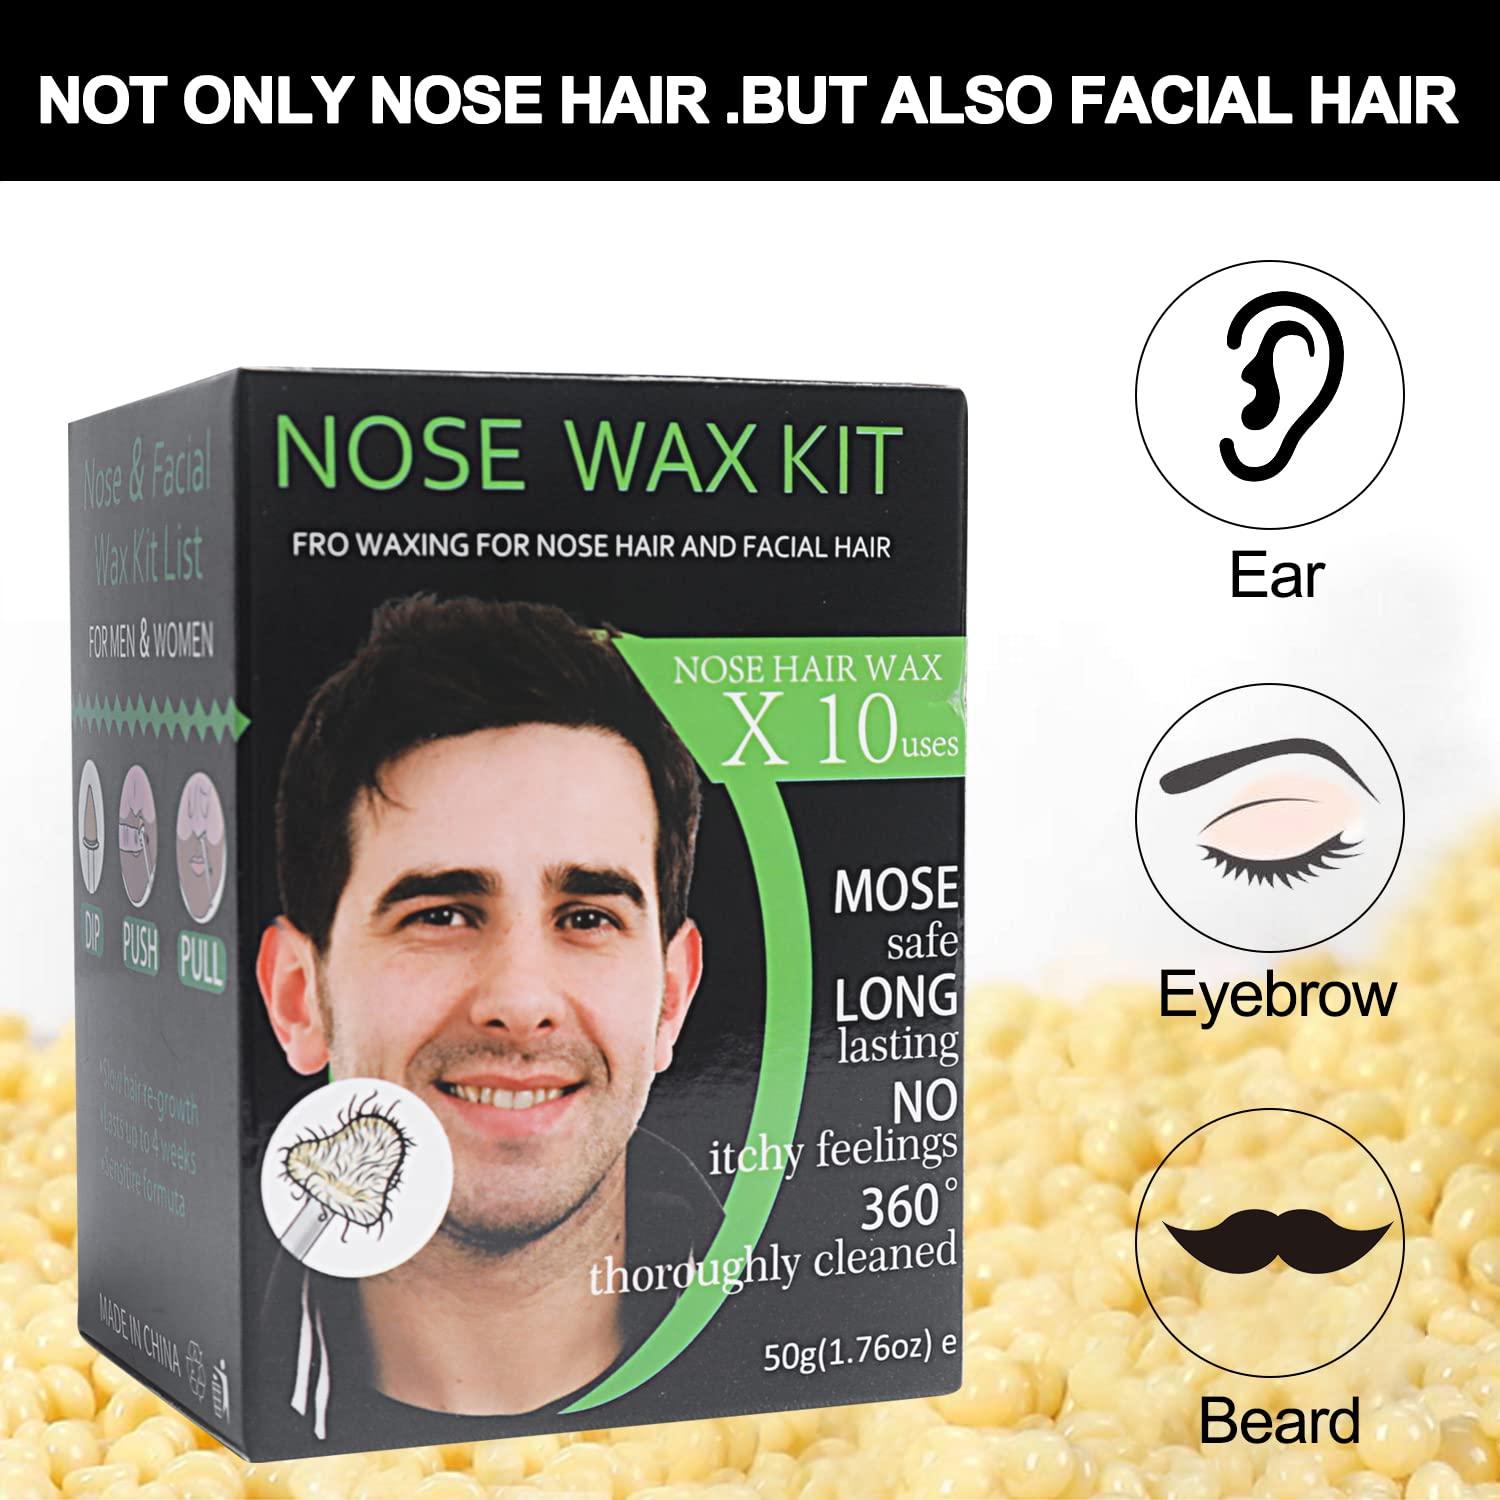 Nose Wax Kit, Nose Waxing Hair Wax Removal for Men Women, Nose Hair Waxing  Kit For Men Ear Hair Waxing Kit Nose Hair Removal Kit for 50g Wax Beads 20  Applicators 10